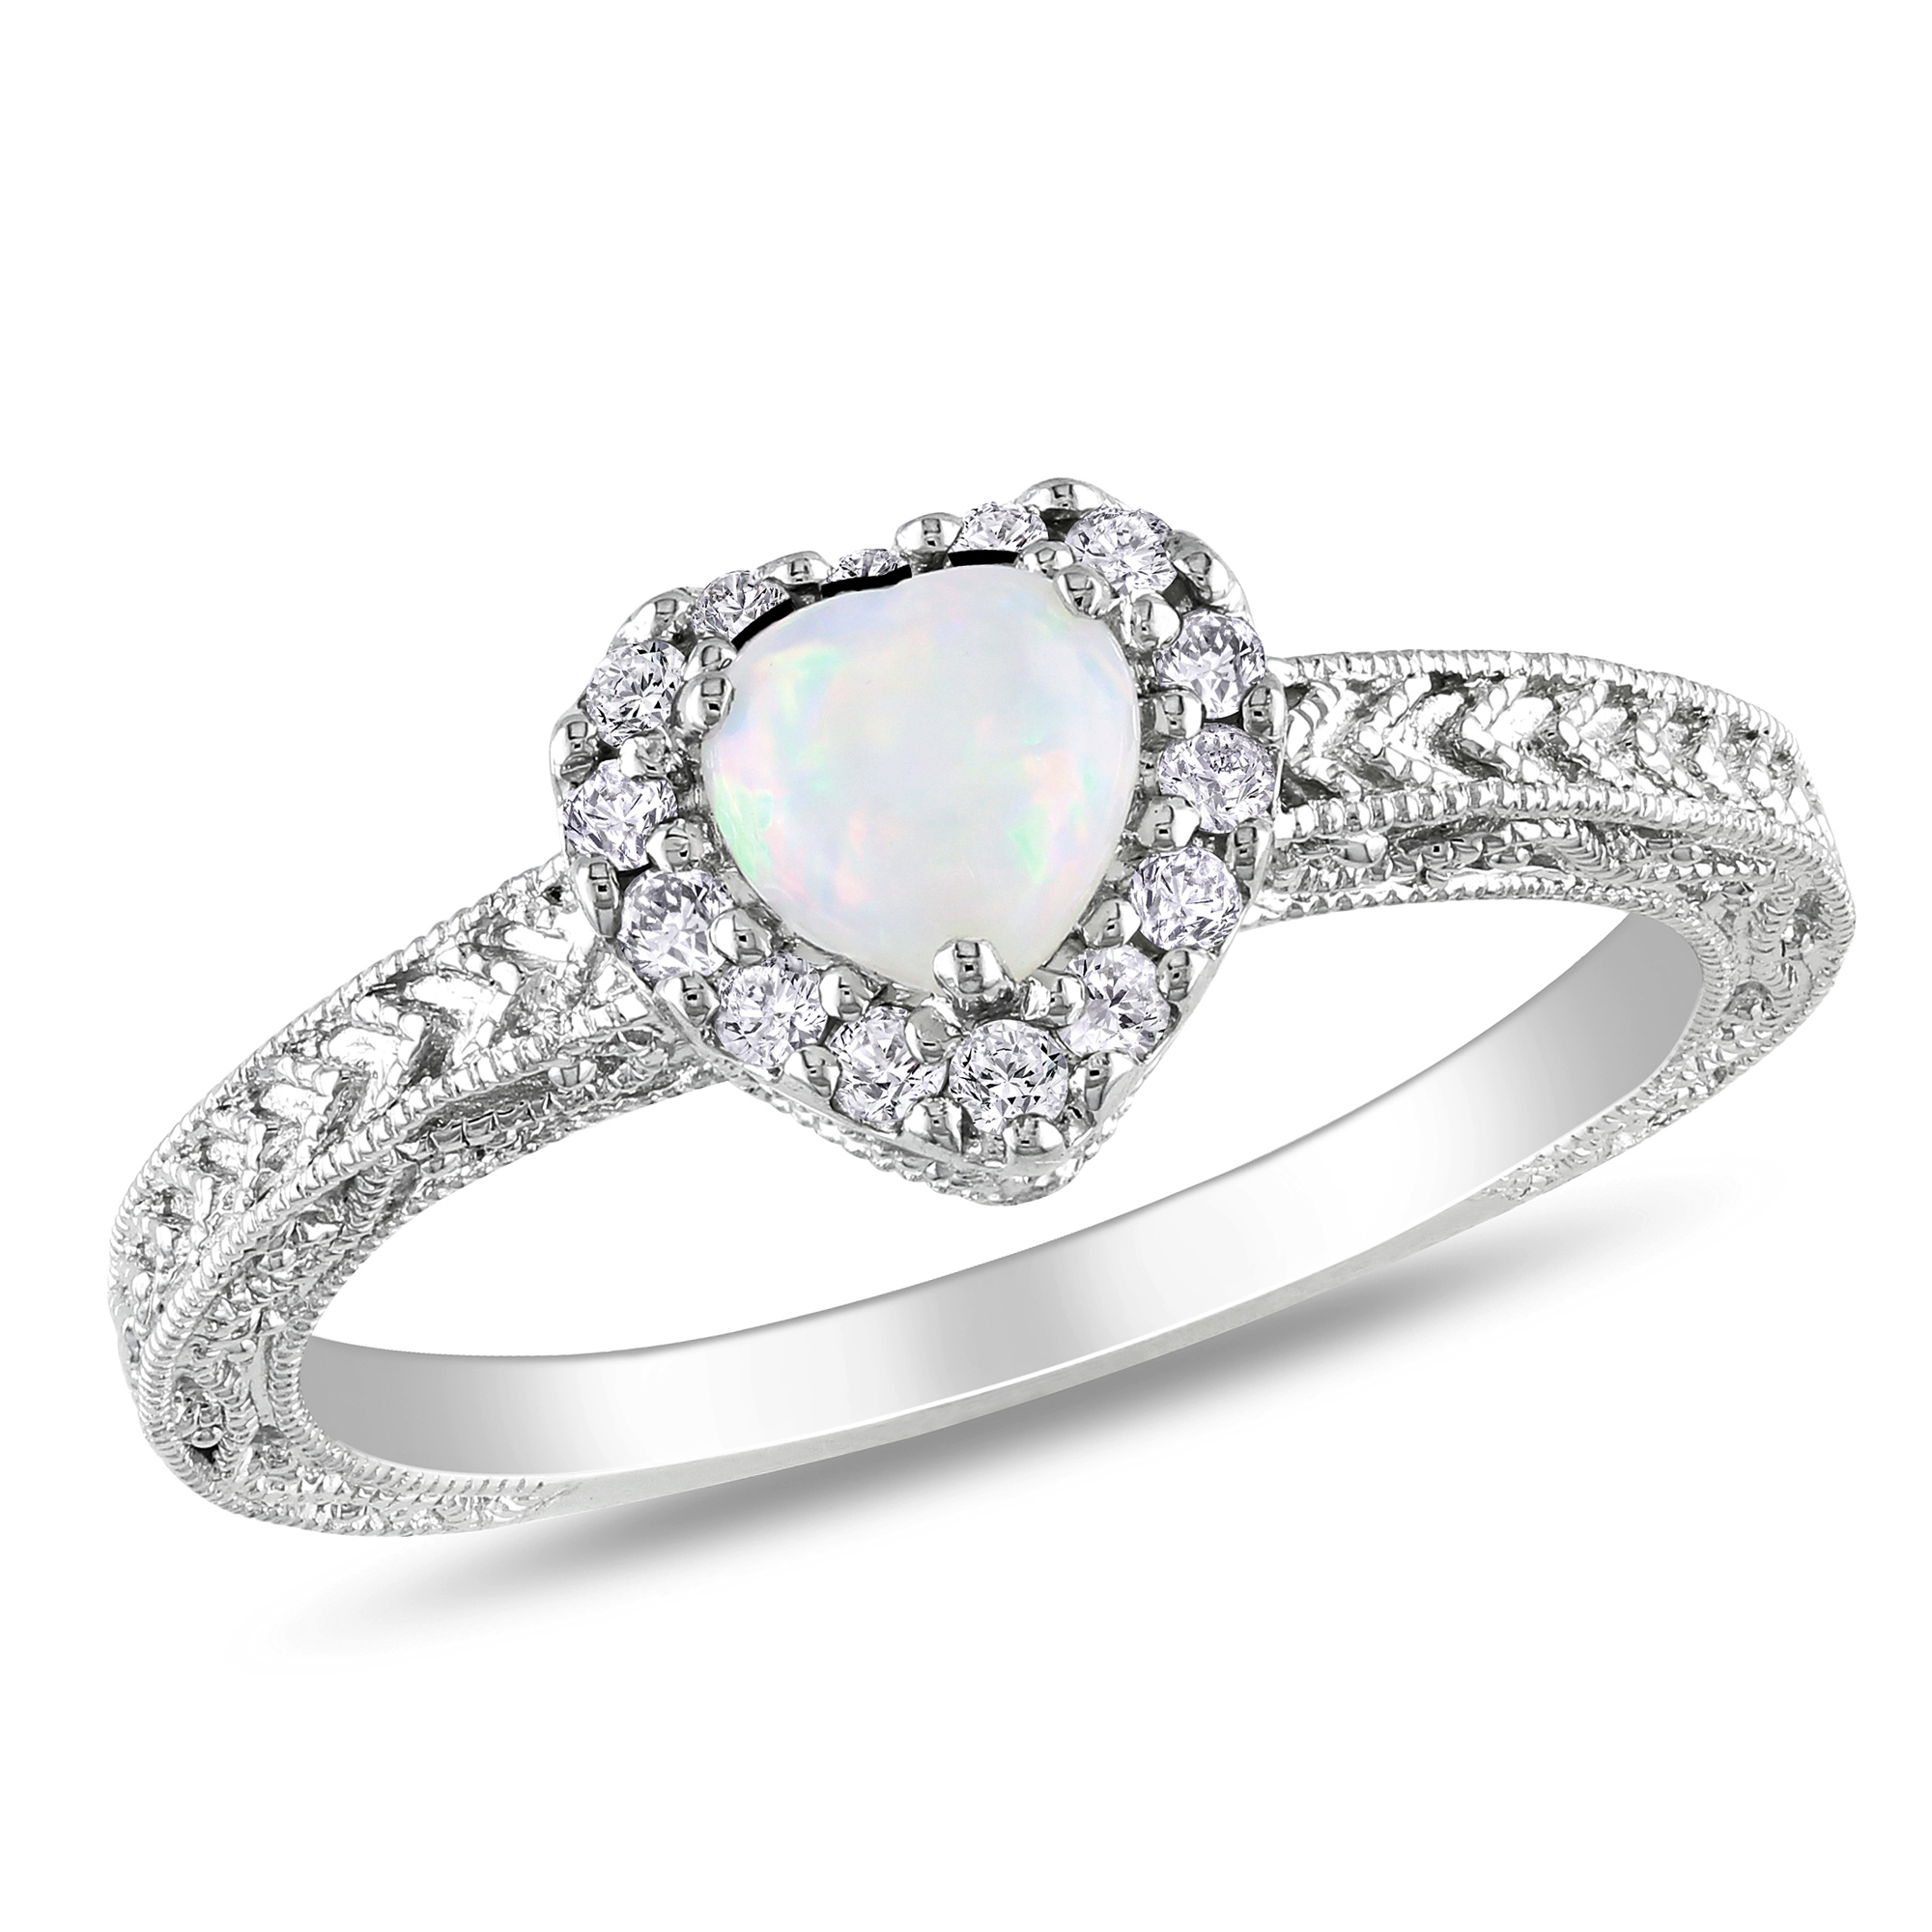 1/7 Carat T.W. Diamond and 1/3 Carat T.G.W. Opal Fashion Ring in Sterling Silver GH I3